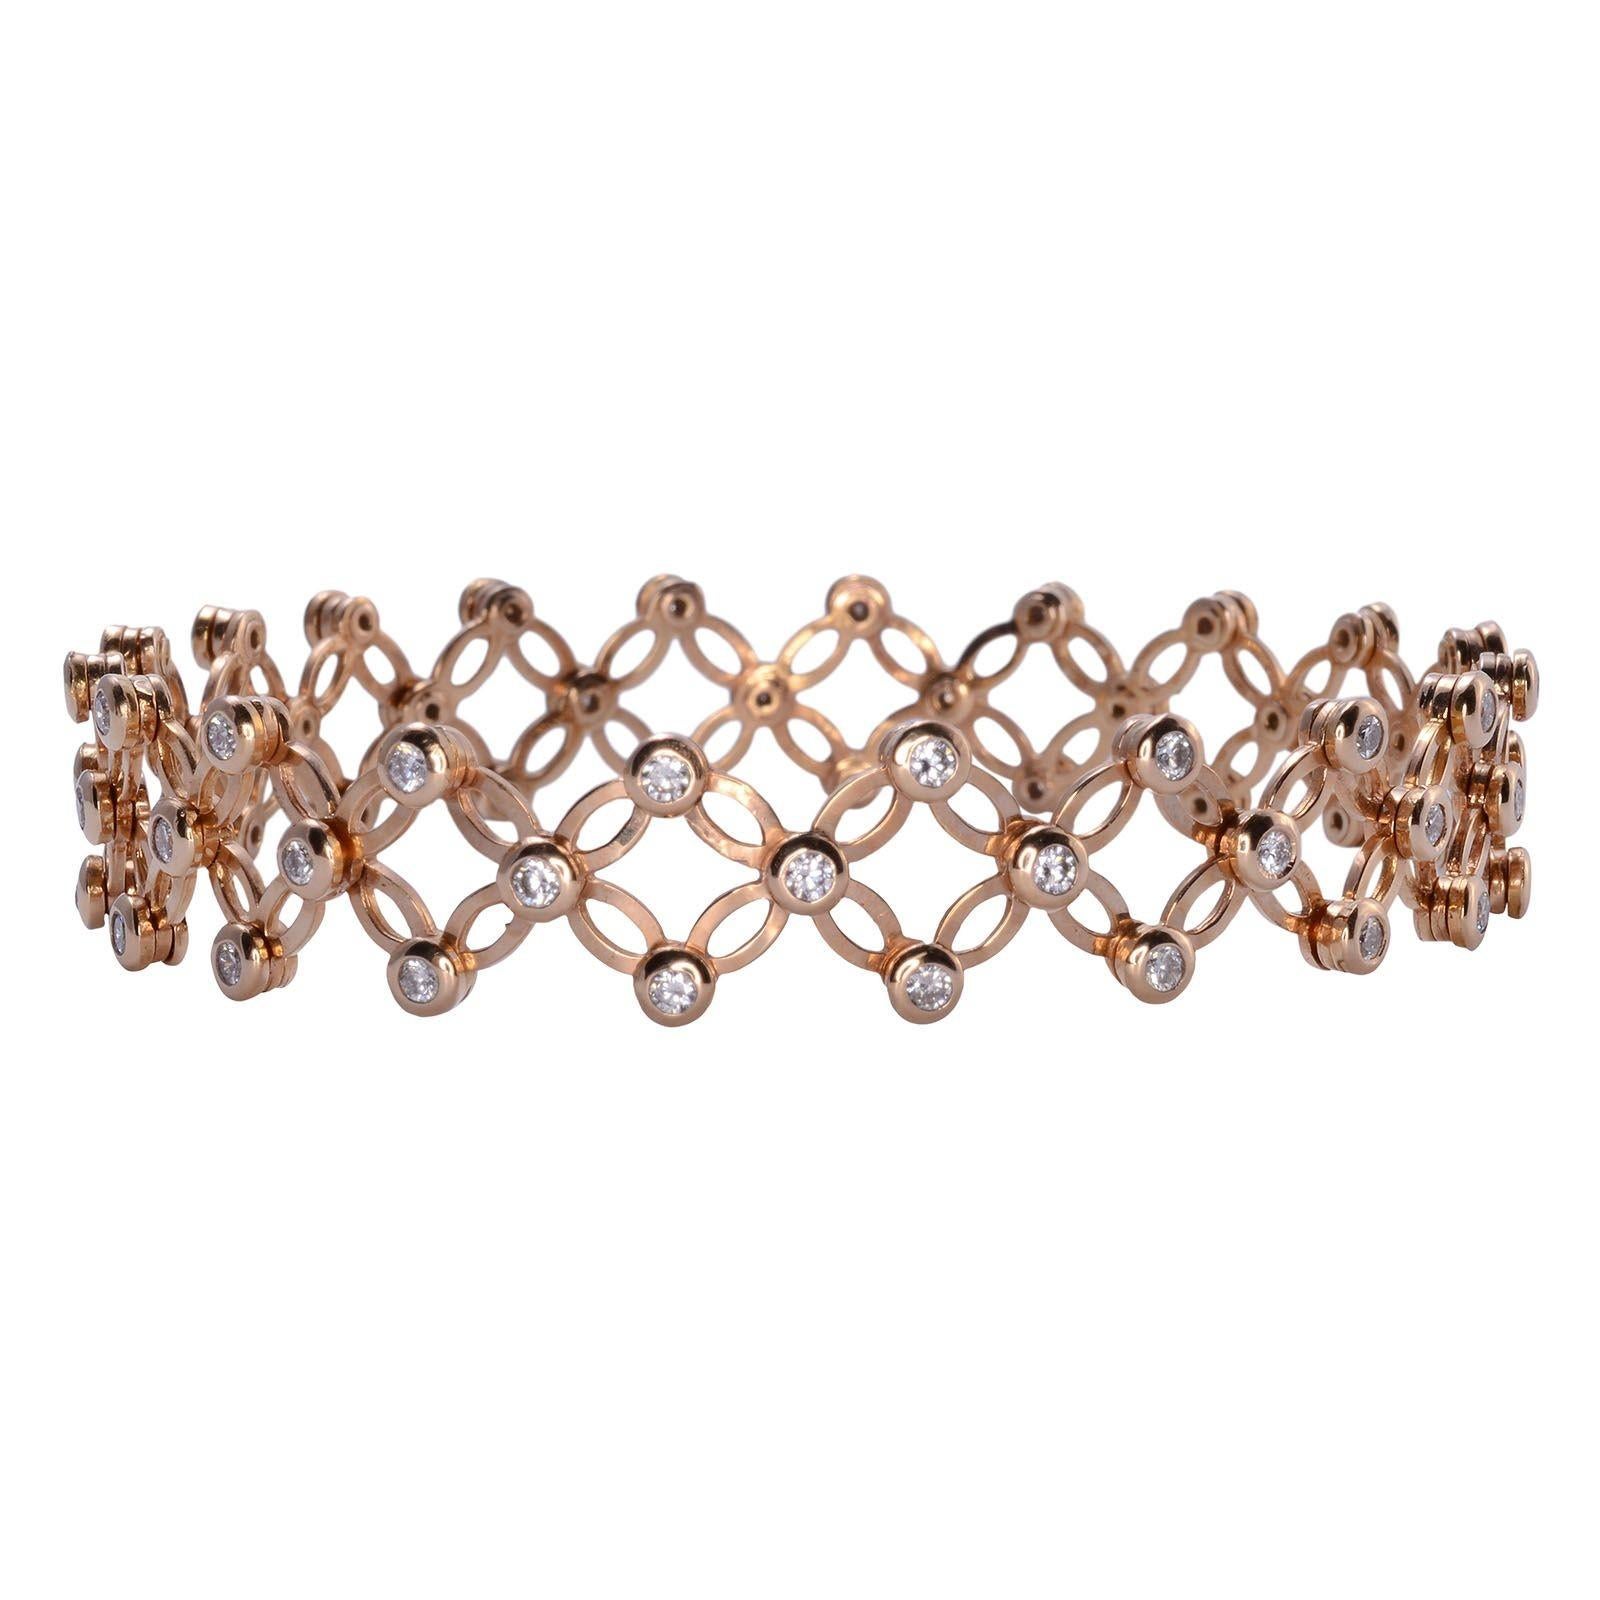 Estate Italian SI.RO Gioelli 18K rose gold diamond convertible ring or bracelet. This 18 karat rose gold ring converts to a bracelet. The flex ring bracelet features 60 diamonds at 1.32 carat total weight. The diamonds are VS1 clarity and G-H color.